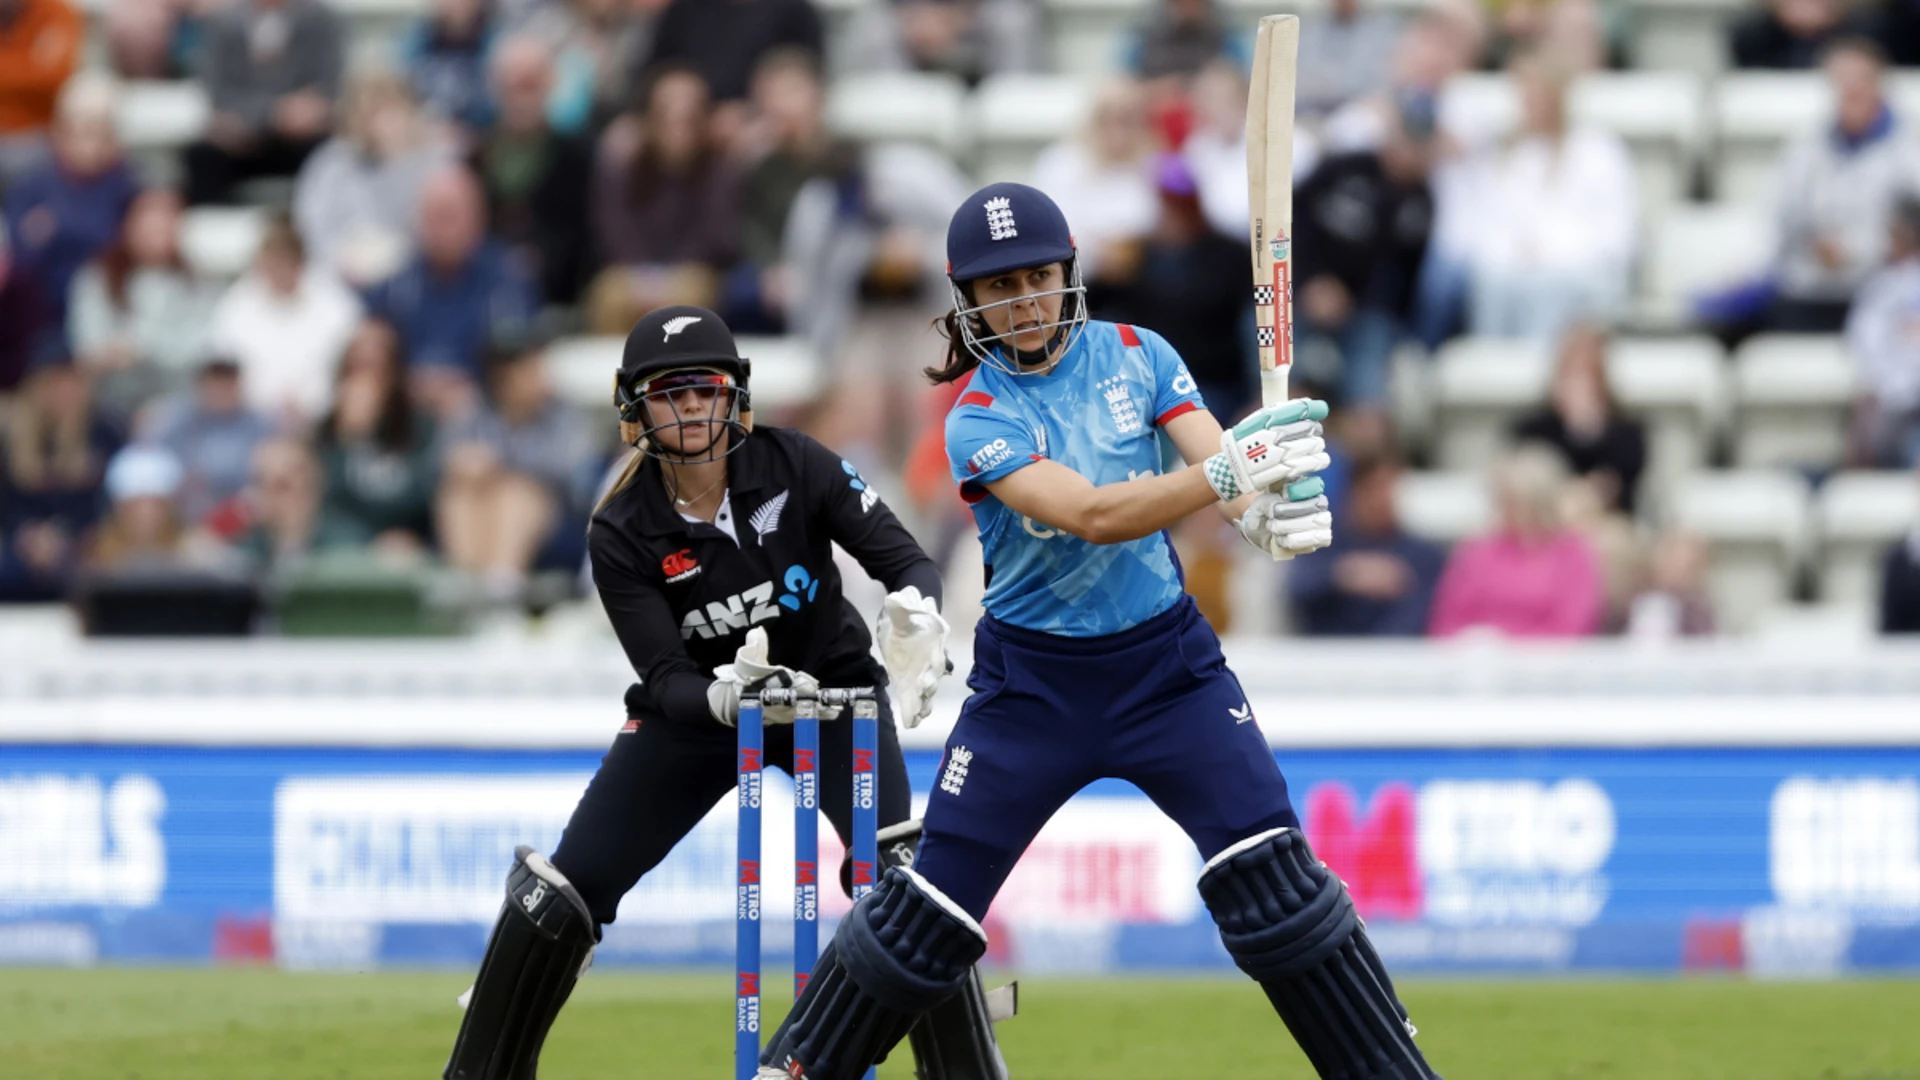 Bouchier stars as England women cruise to ODI series win over New Zealand